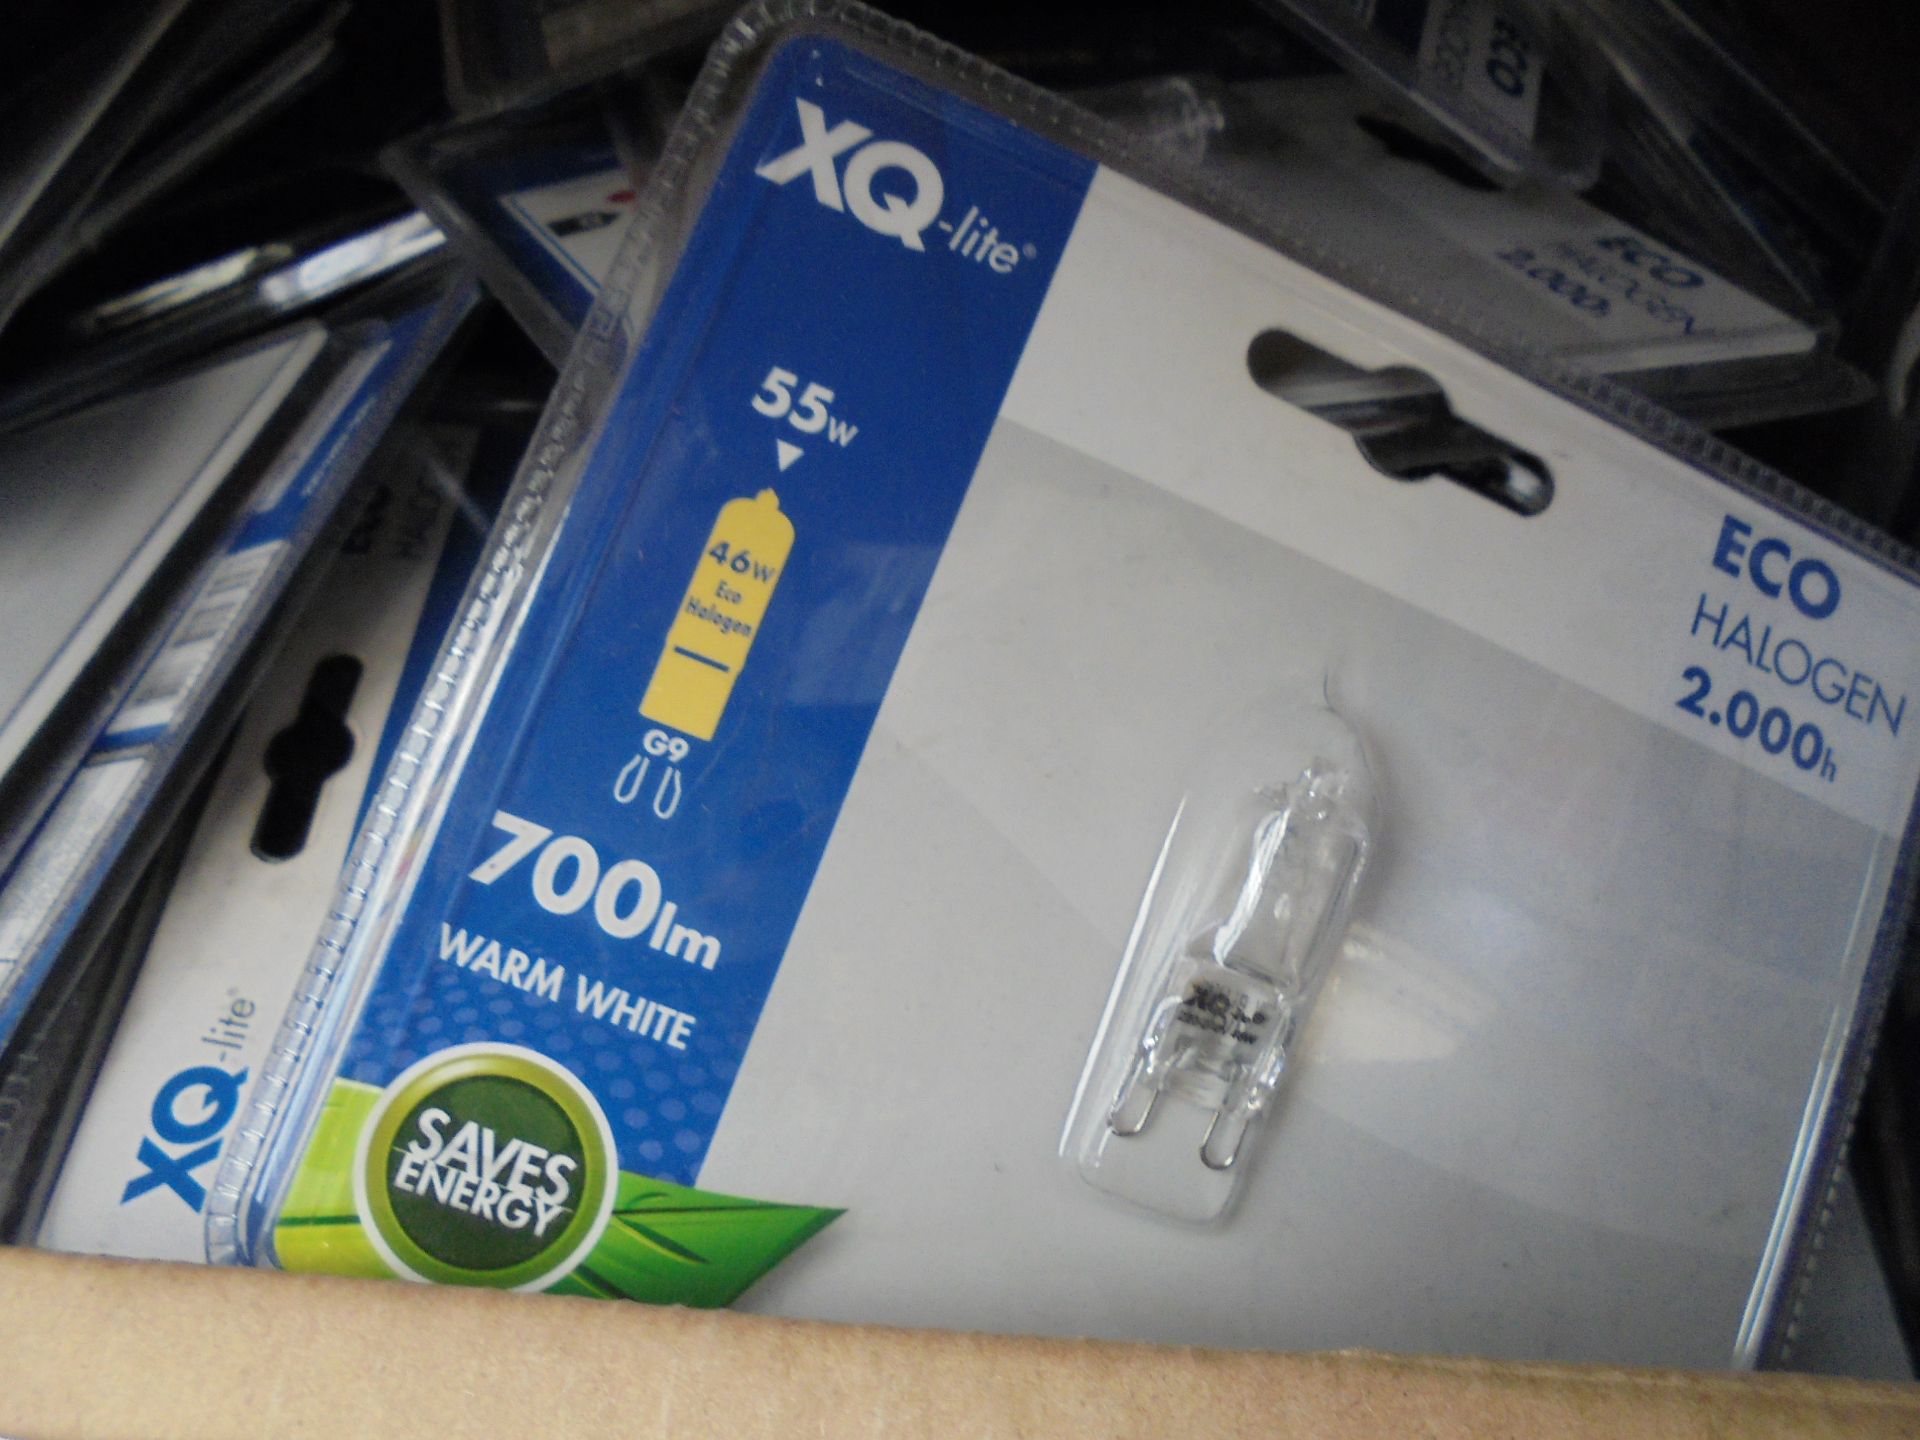 10x XQ Lite Eco halogen 700lm warm white bulbs, all new and packaged.